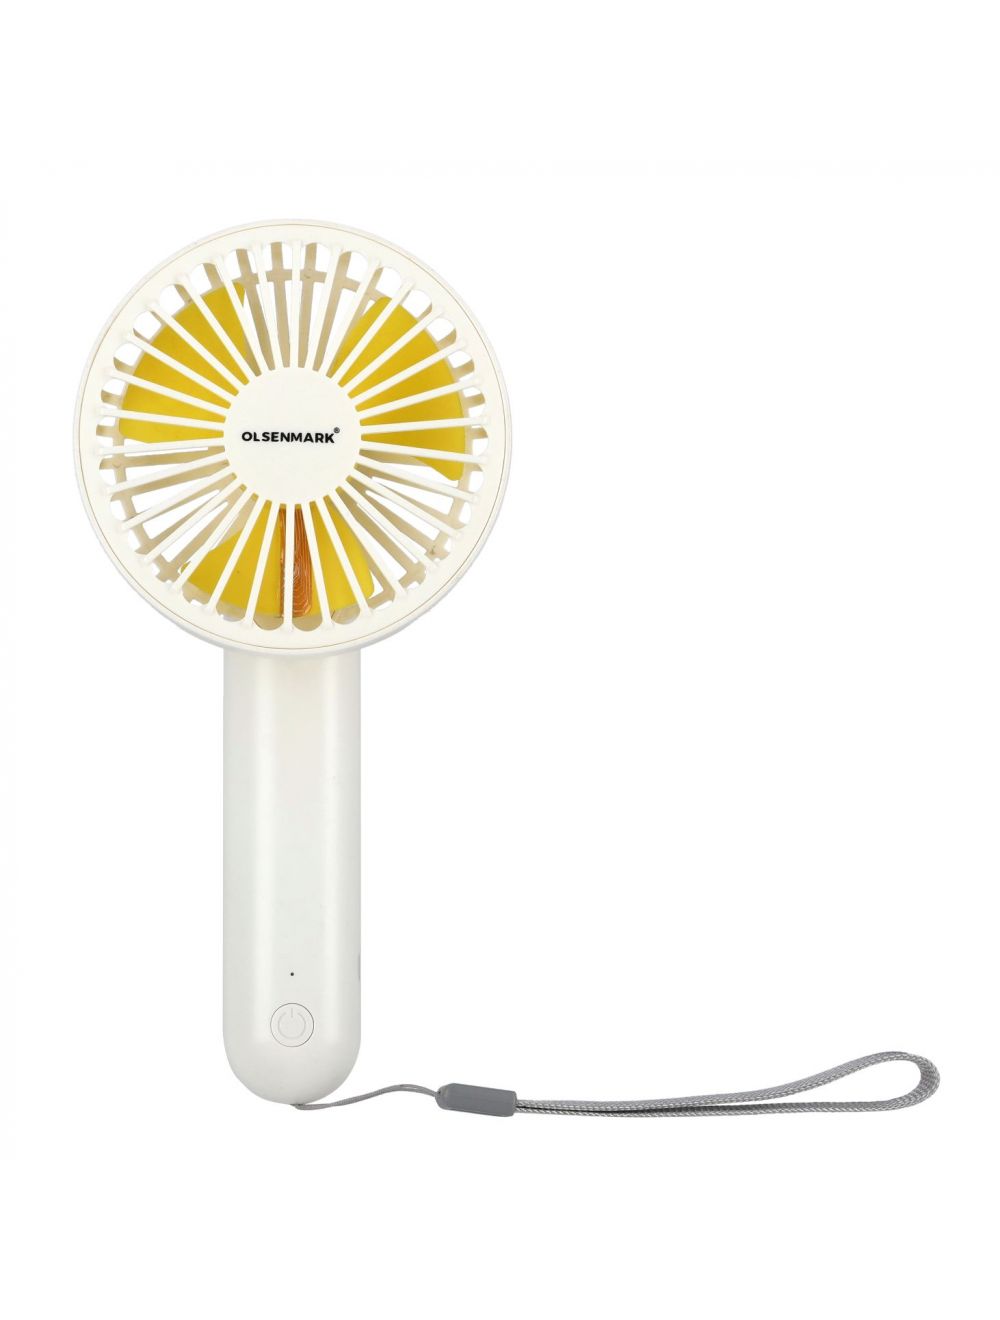 Olsenmark Rechargeable Mini Fan - Personal Portable Fan with 3 Speed Options - | Led Flash Light | Up to 4 Hours Working with 1200 MAH Battery